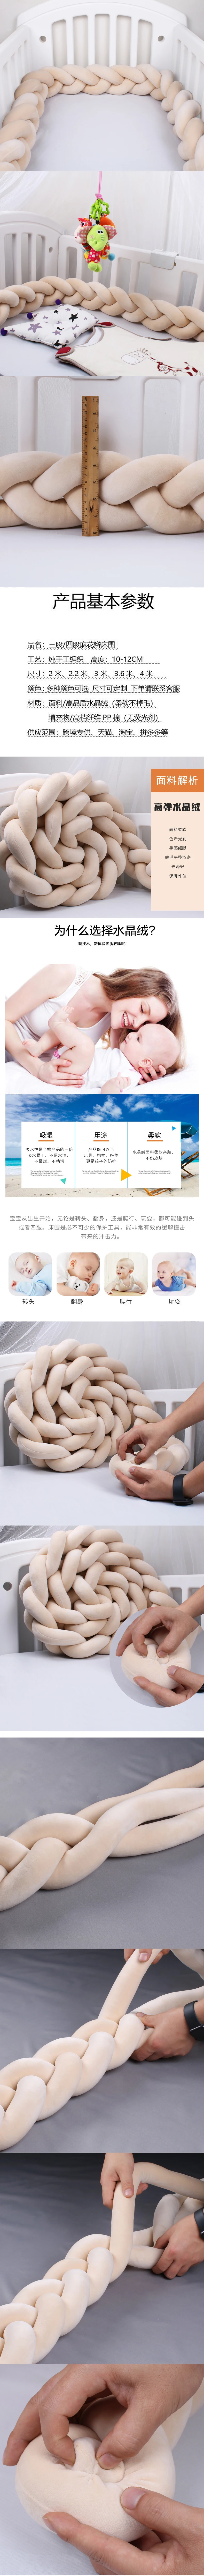 fitted sheet 3 Knotted Newborn Baby Crib Bumper Bed Braid Baby Room Decor  Pillow Cushion Bumper for Infant Bebe Crib Protector waterproof mattress protector